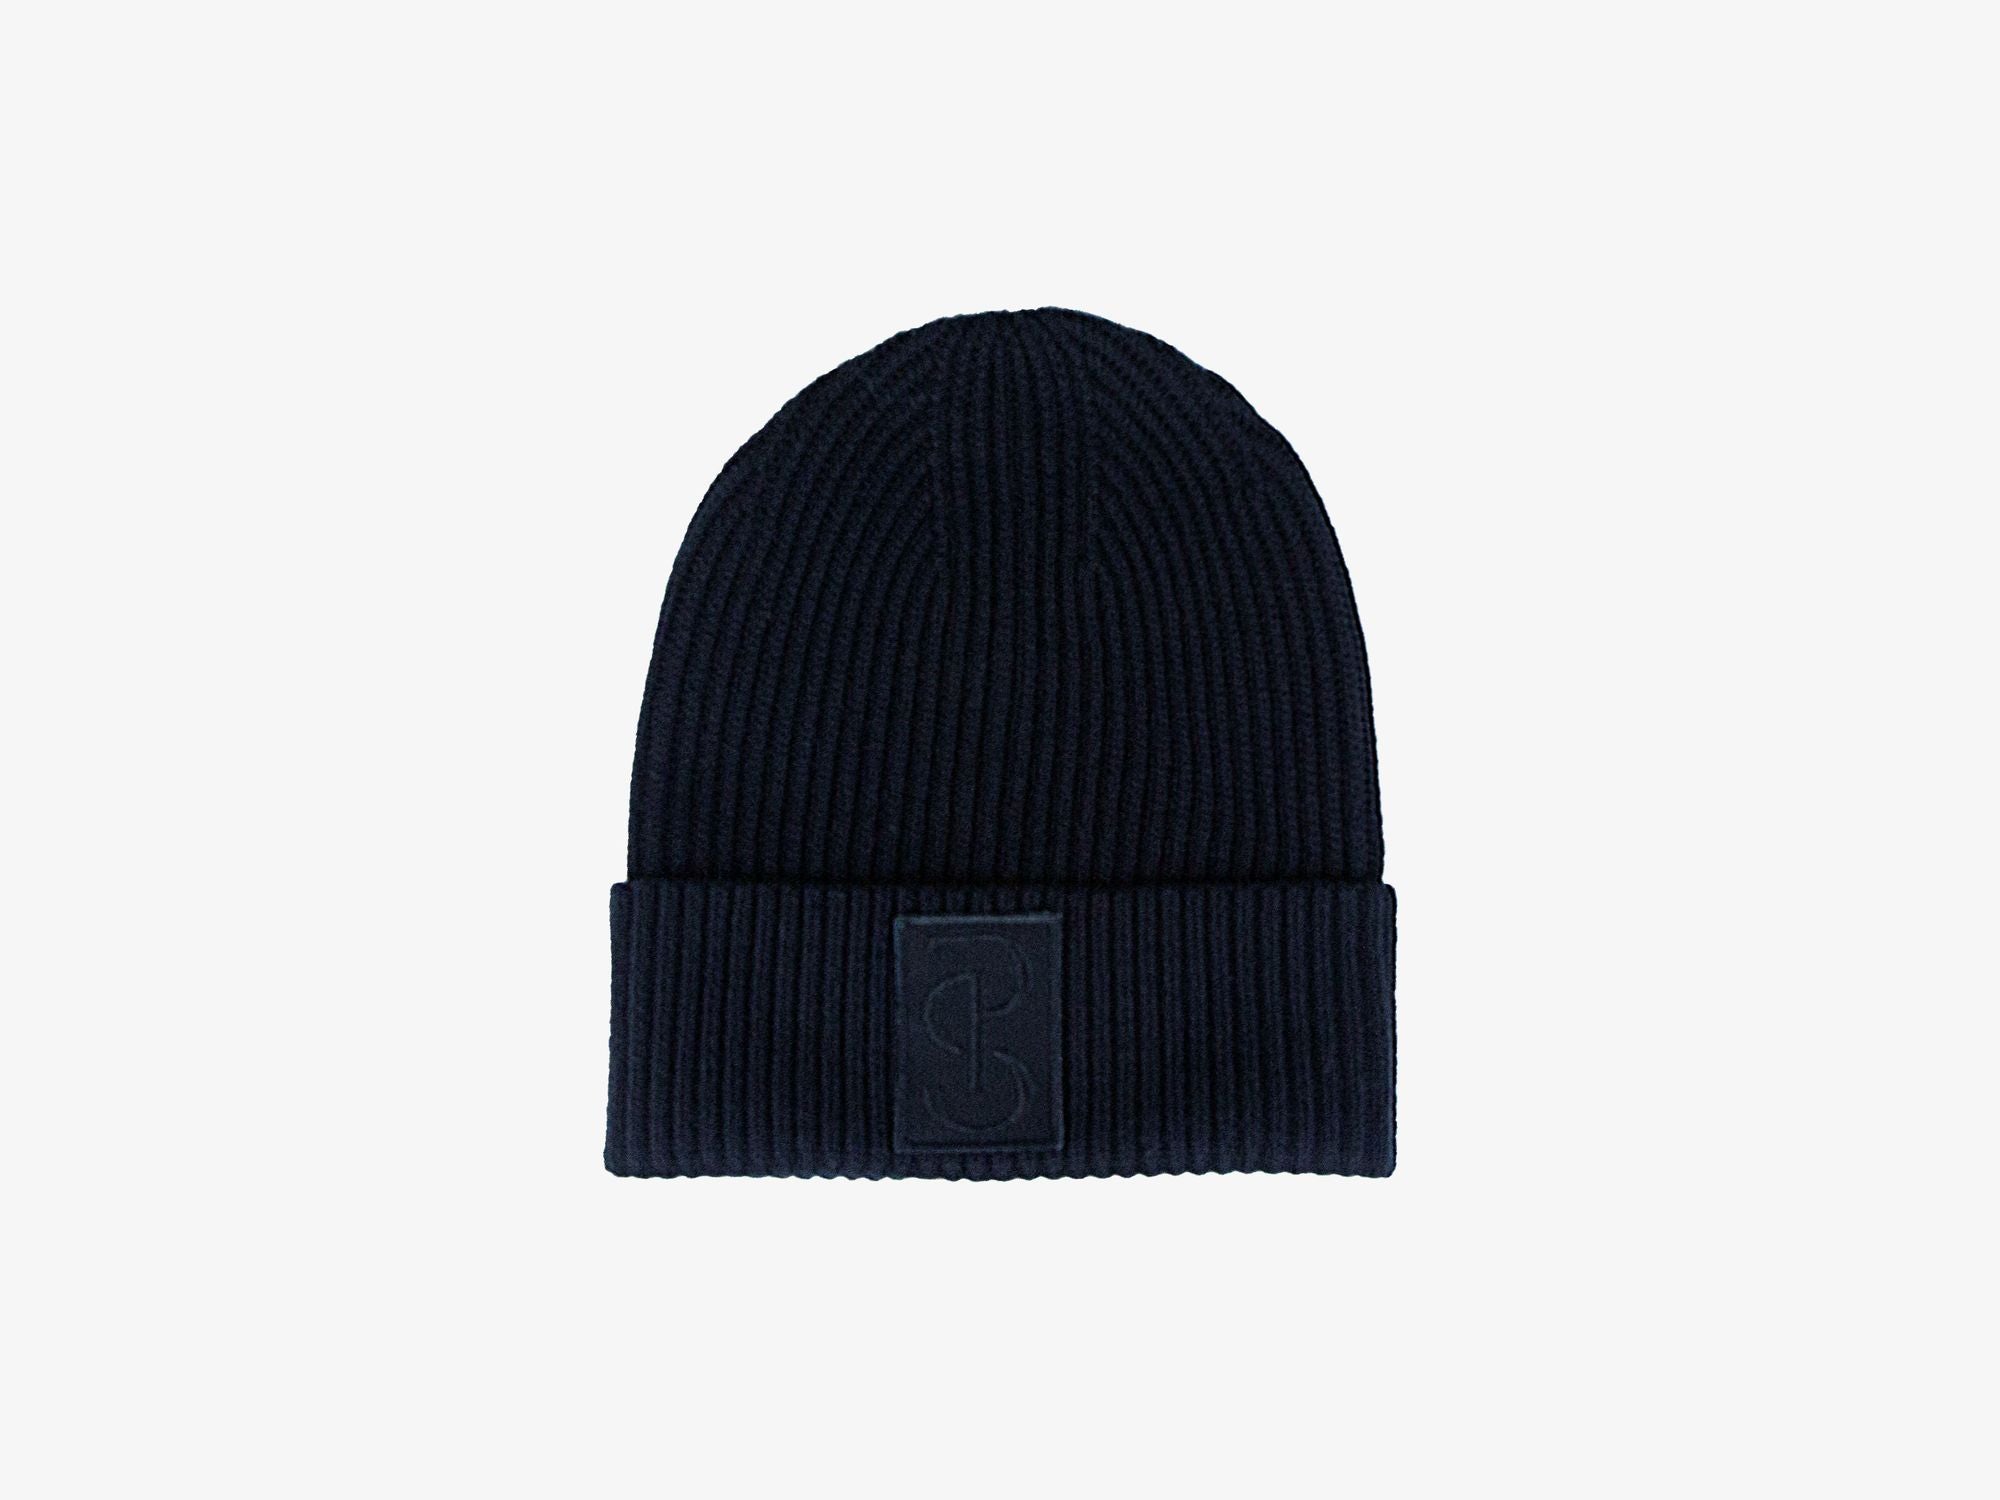 PS of Sweden Sally Knitted Beanie